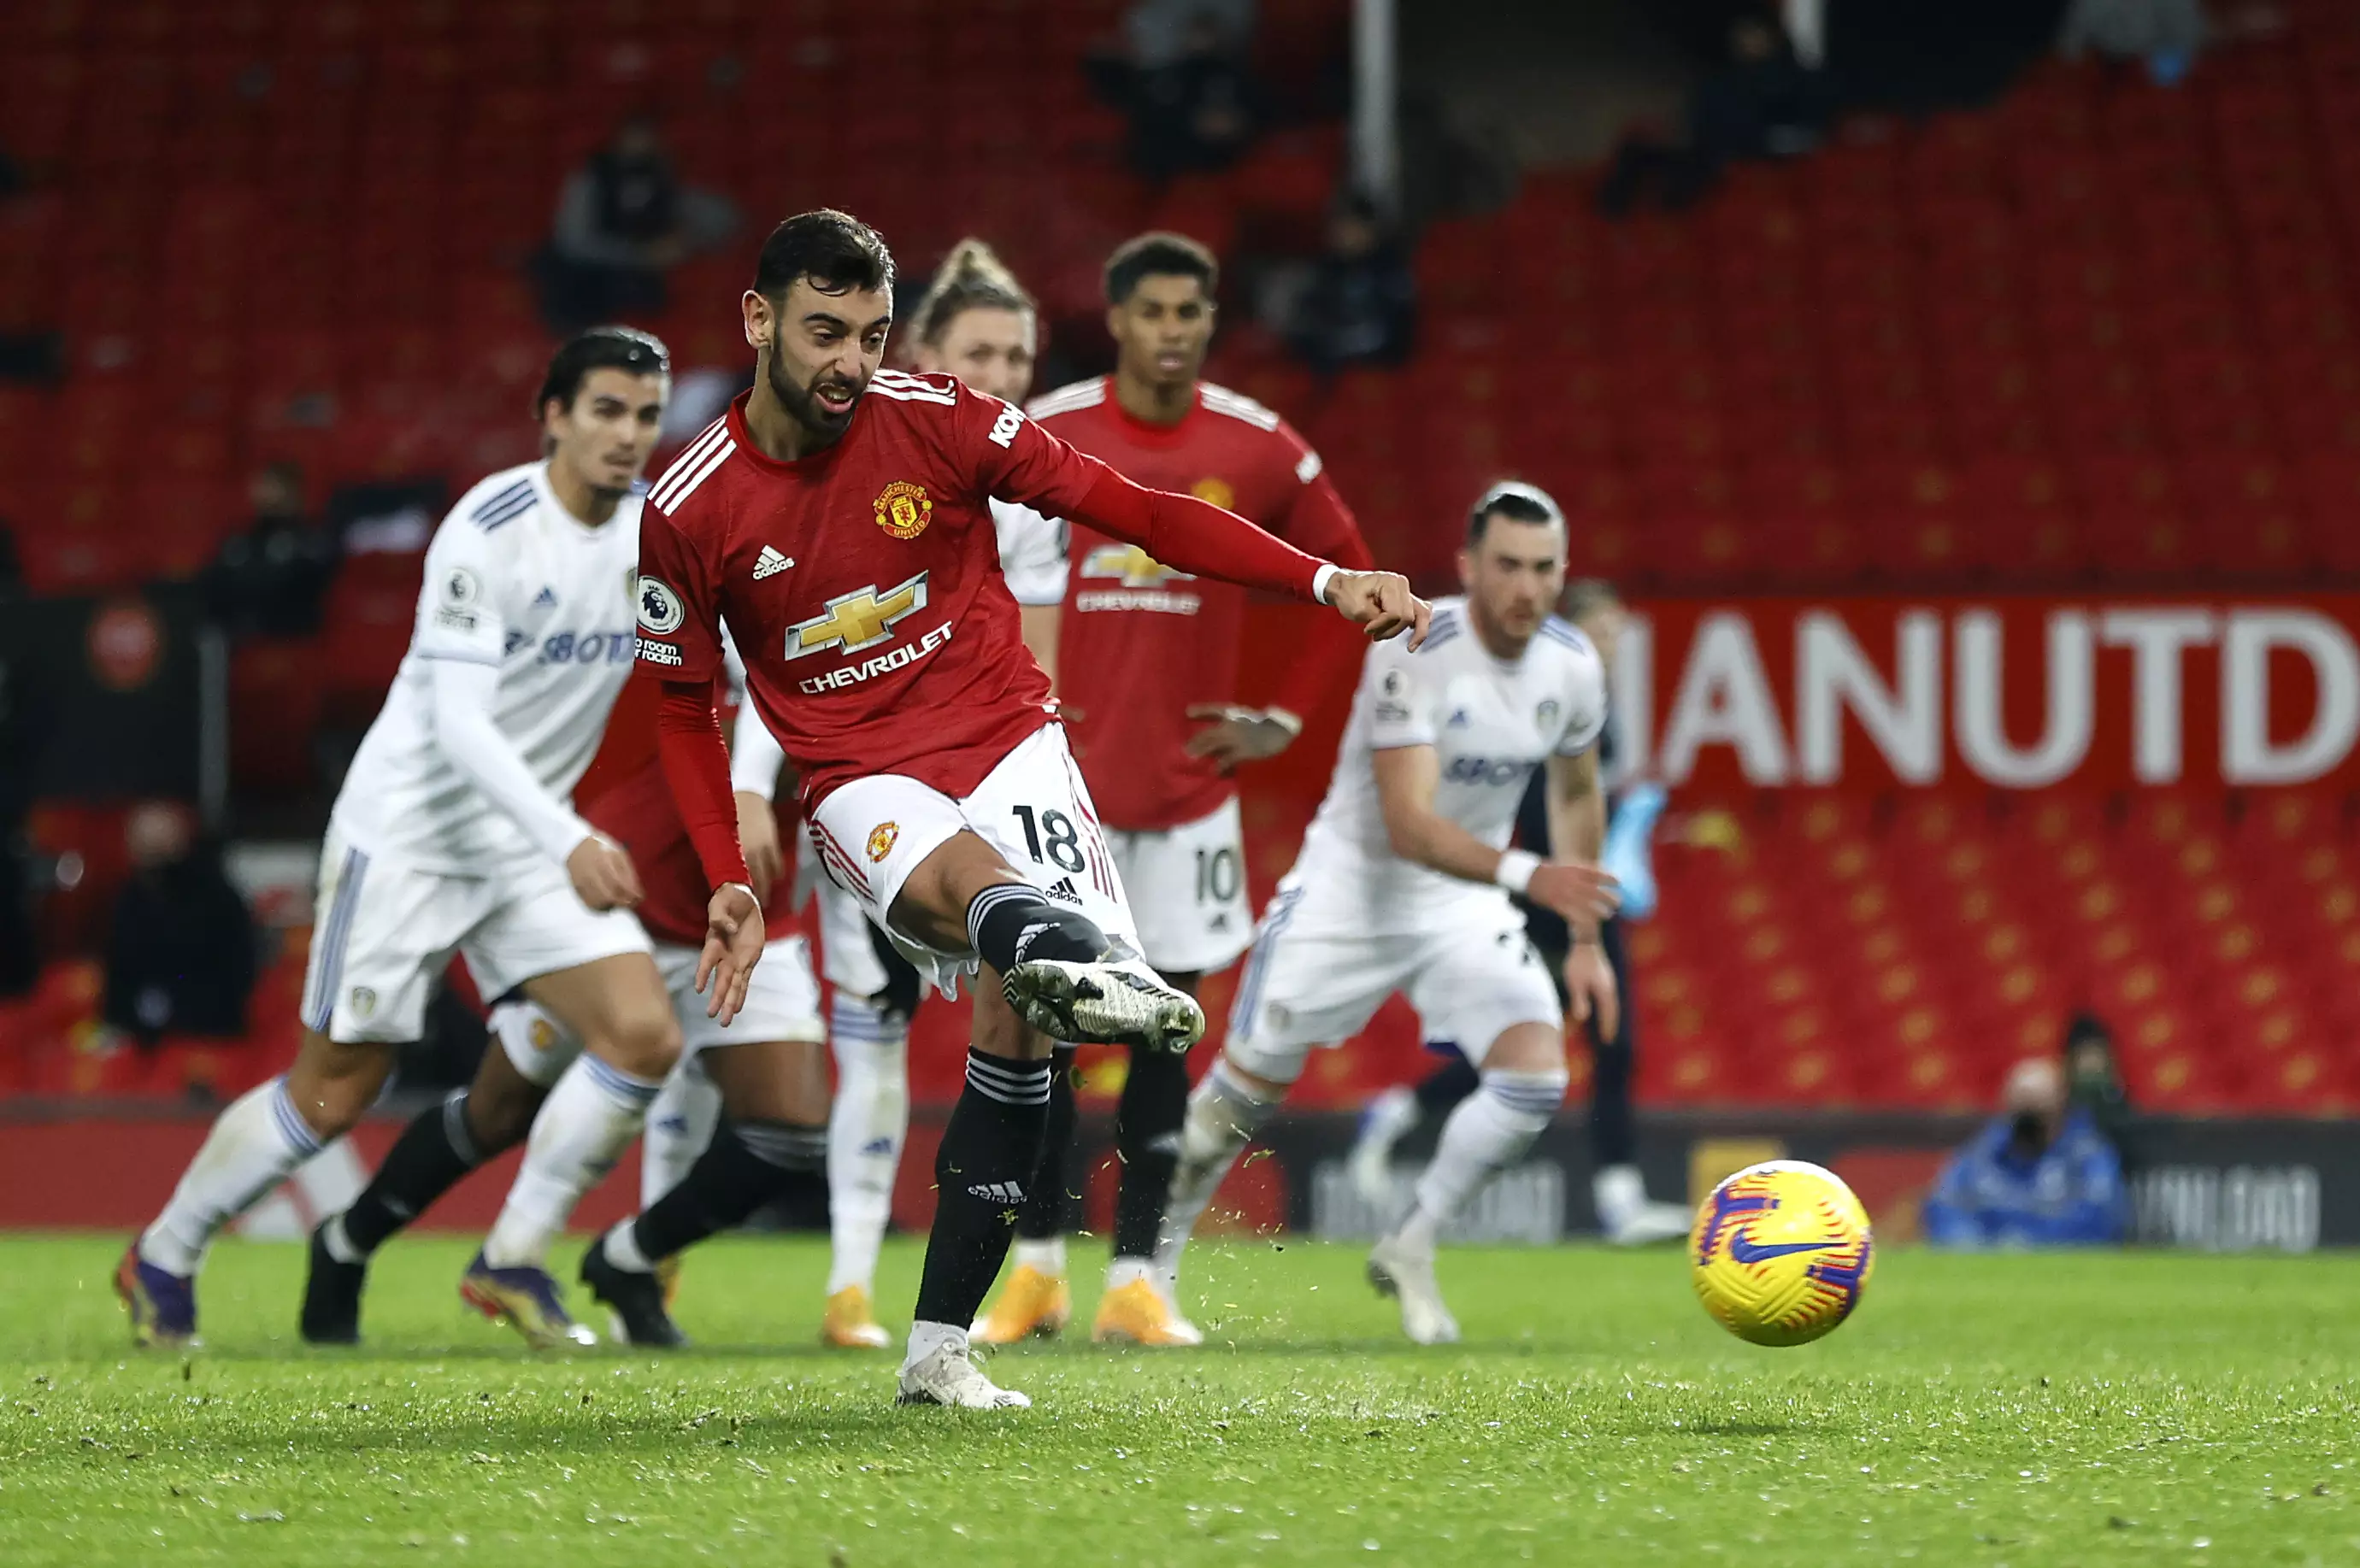 Manchester United's Bruno Fernandes scored from the spot in the reverse fixture against Leeds United